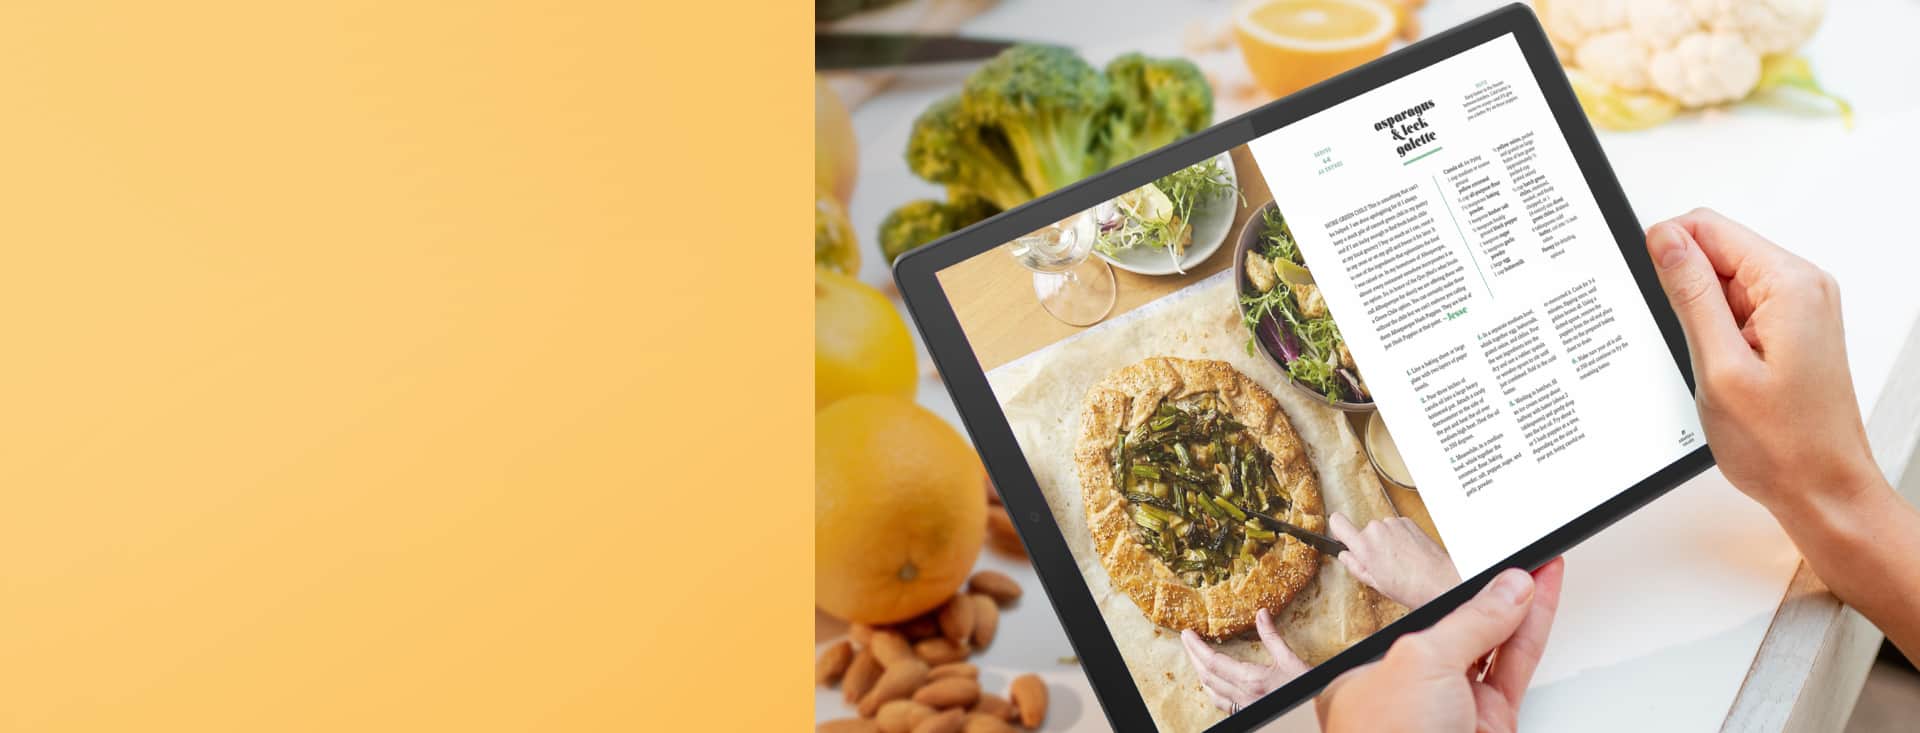 Cooking with NOOK 10" HD Tablet Designed with Lenovo